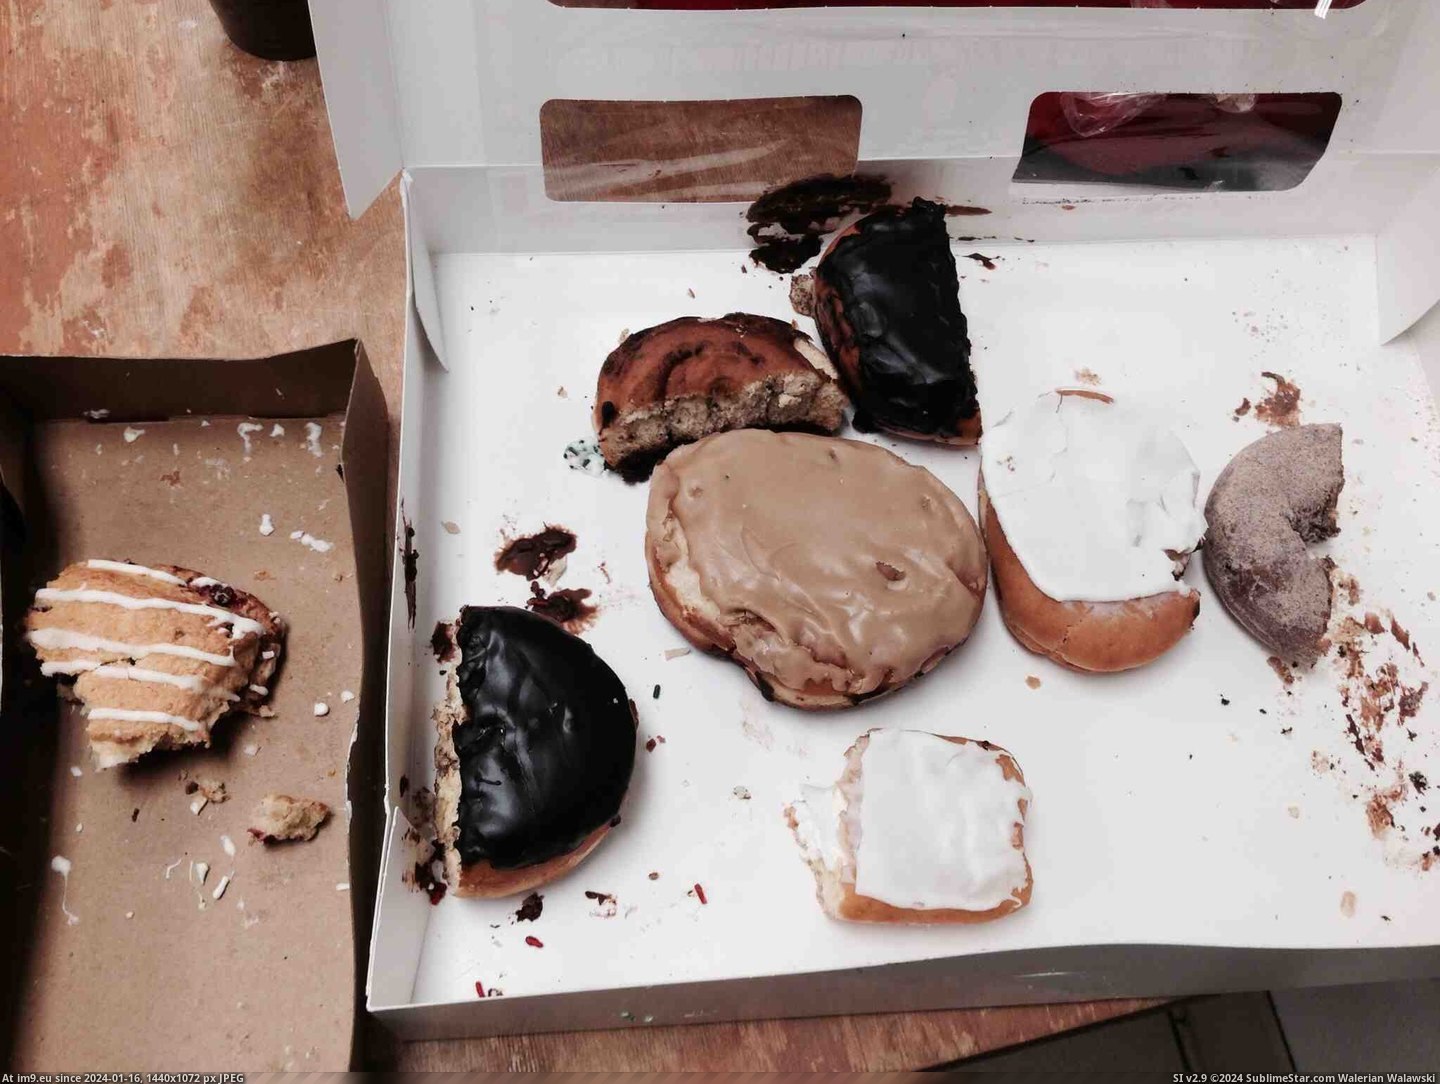 #You #Work #Females #Donuts #Brings [Pics] This is what happens when someone brings in donuts and you work with many females. Pic. (Image of album My r/PICS favs))